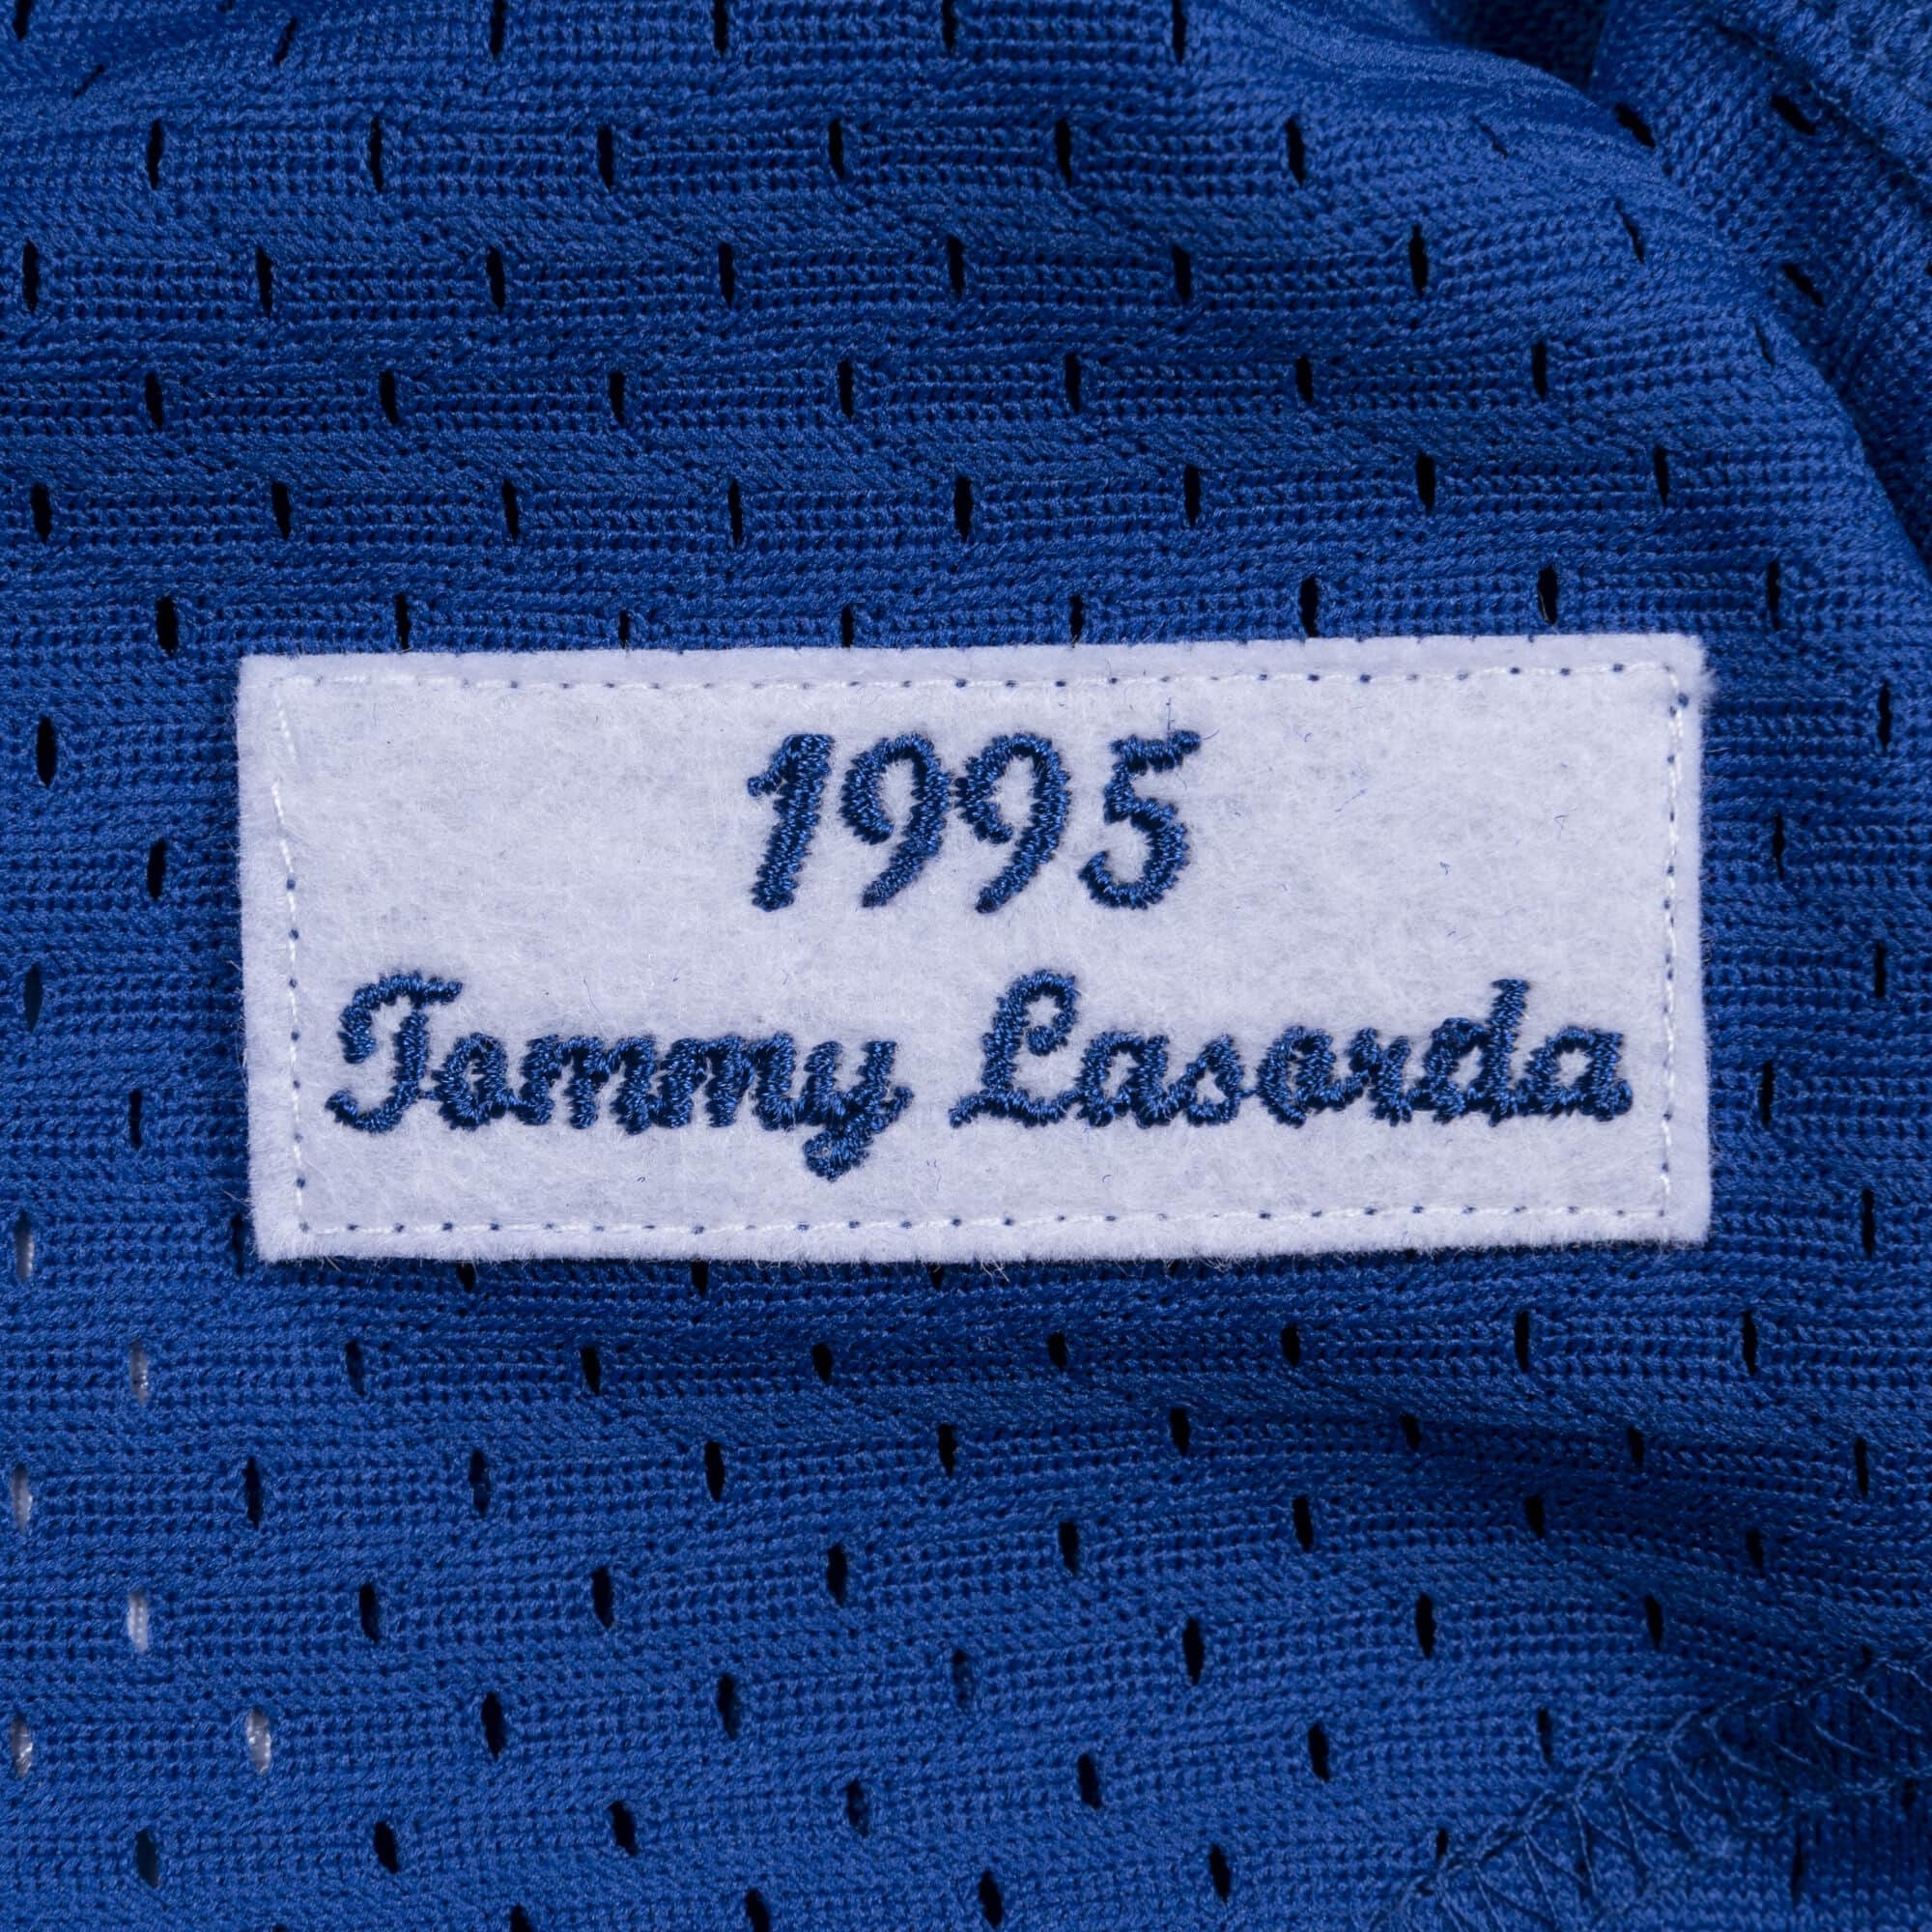 Mitchell & Ness Authentic Tommy Lasorda Los Angeles Dodgers 1995 Button Front Jersey